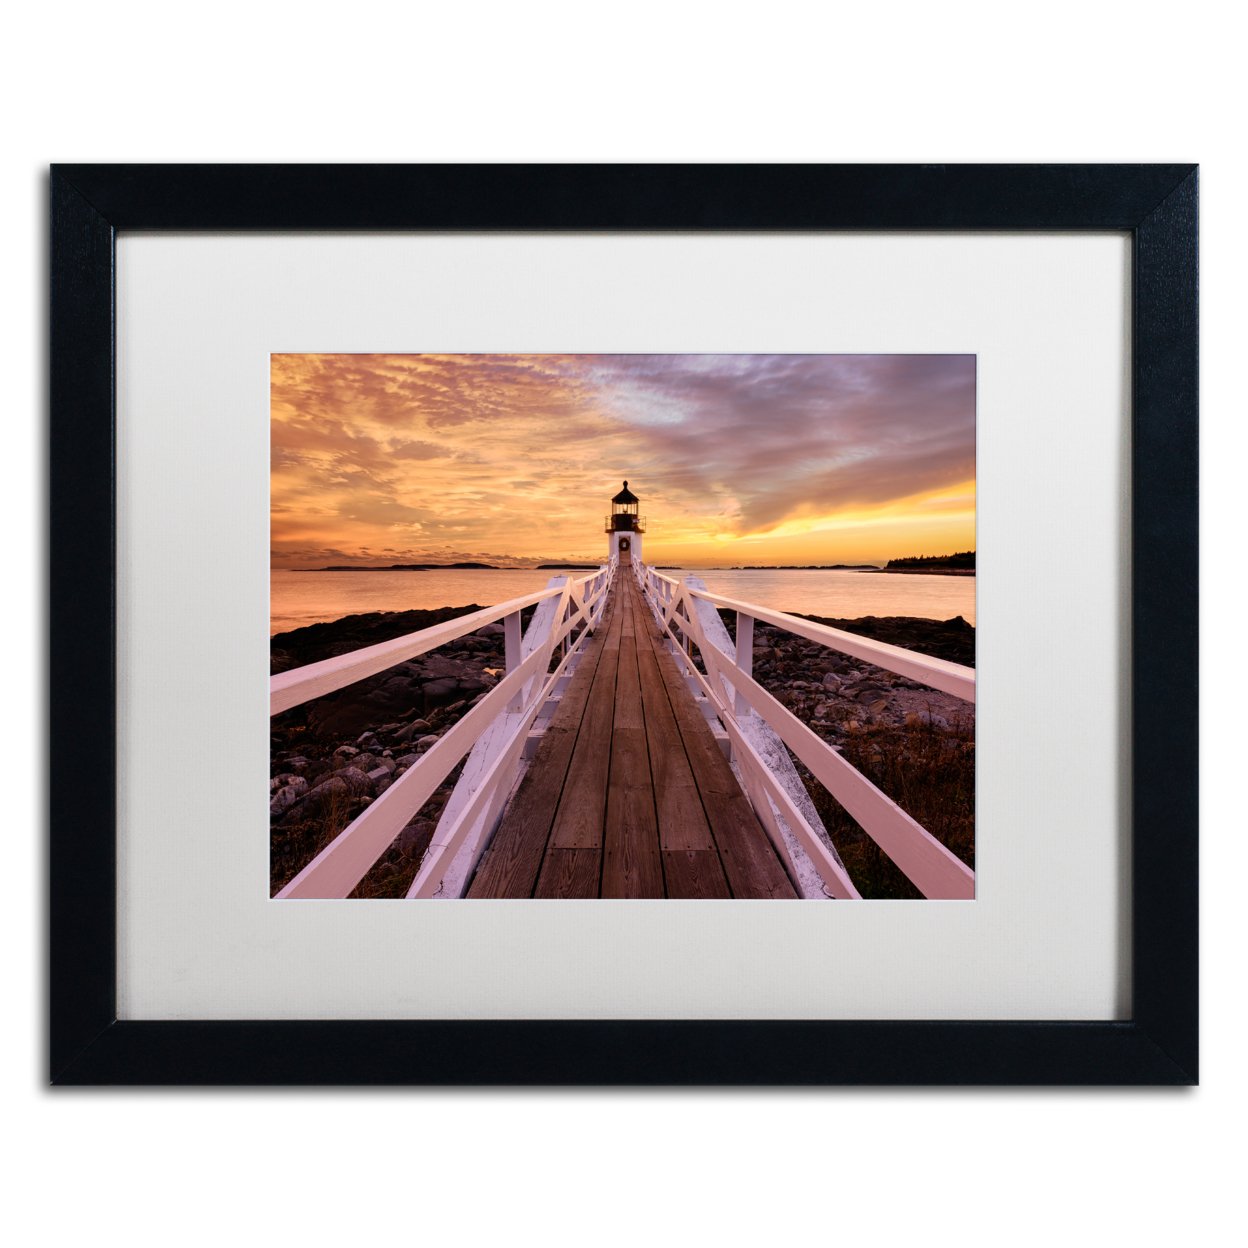 Michael Blanchette Photography 'Runway To The Sky' Black Wooden Framed Art 18 X 22 Inches